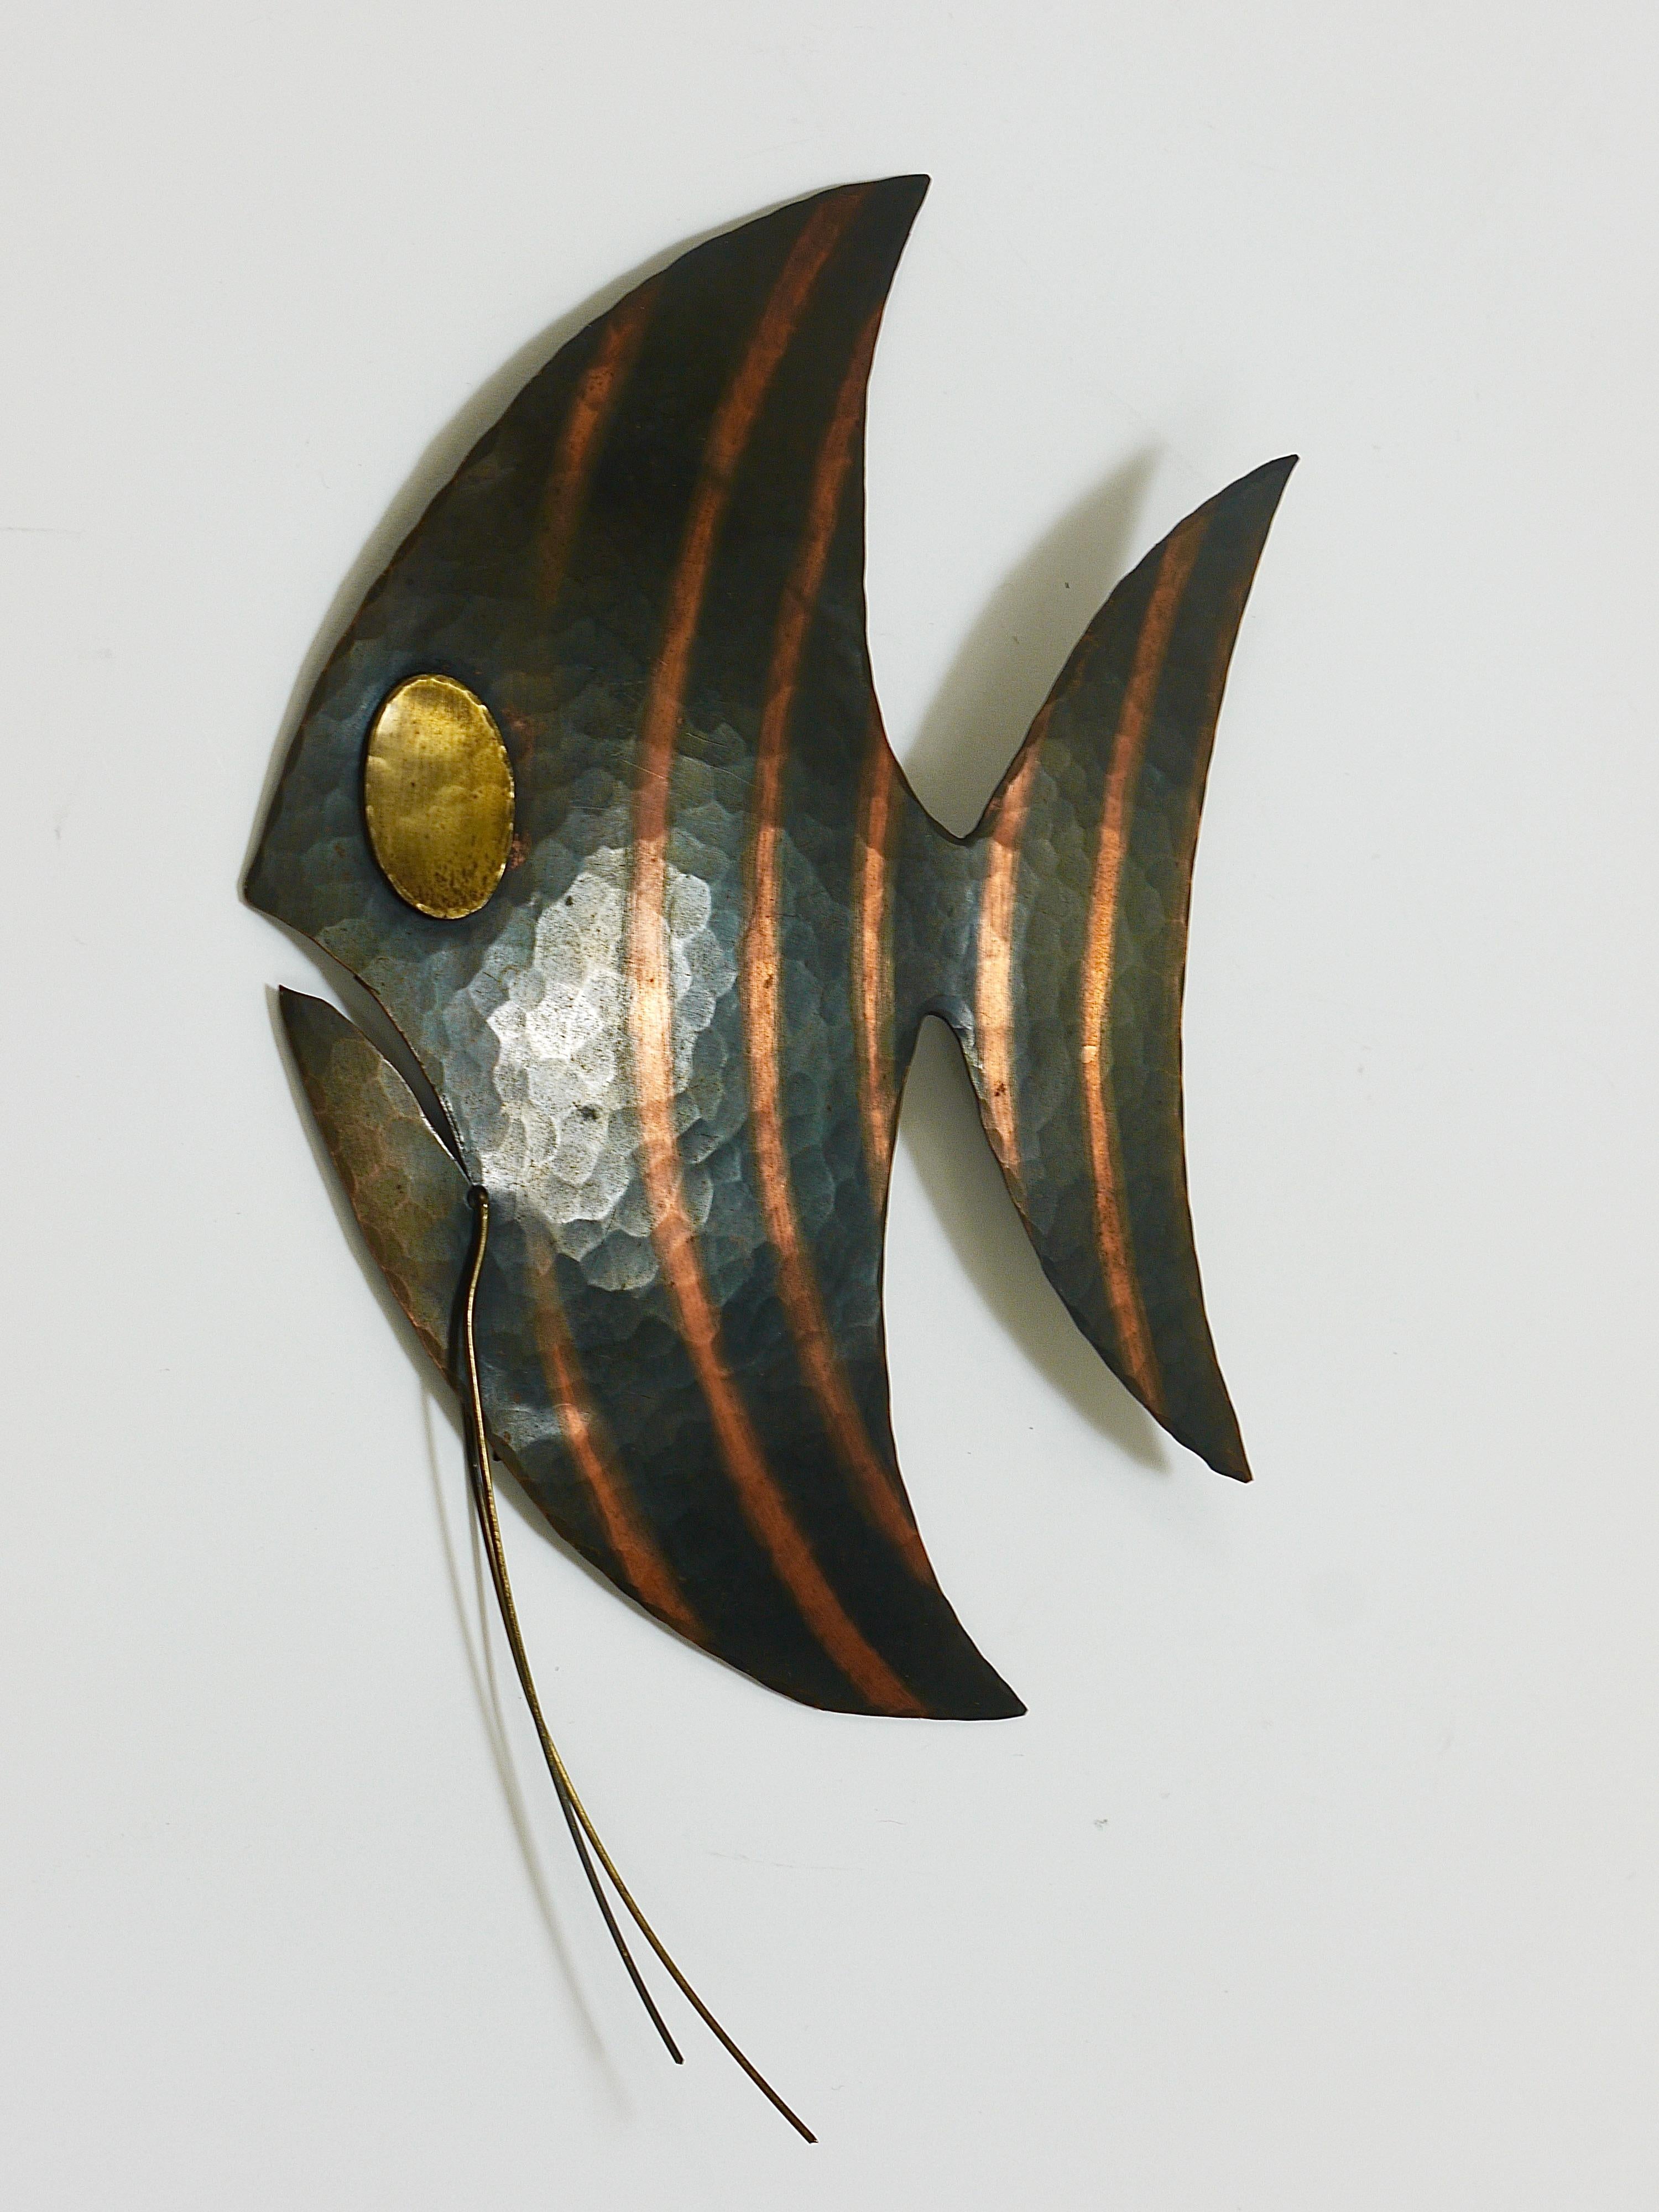 Mid-Century Modern Midcentury Hammered Angel Fish Wall Plaque Sculpture, Copper, Austria, 1950s For Sale